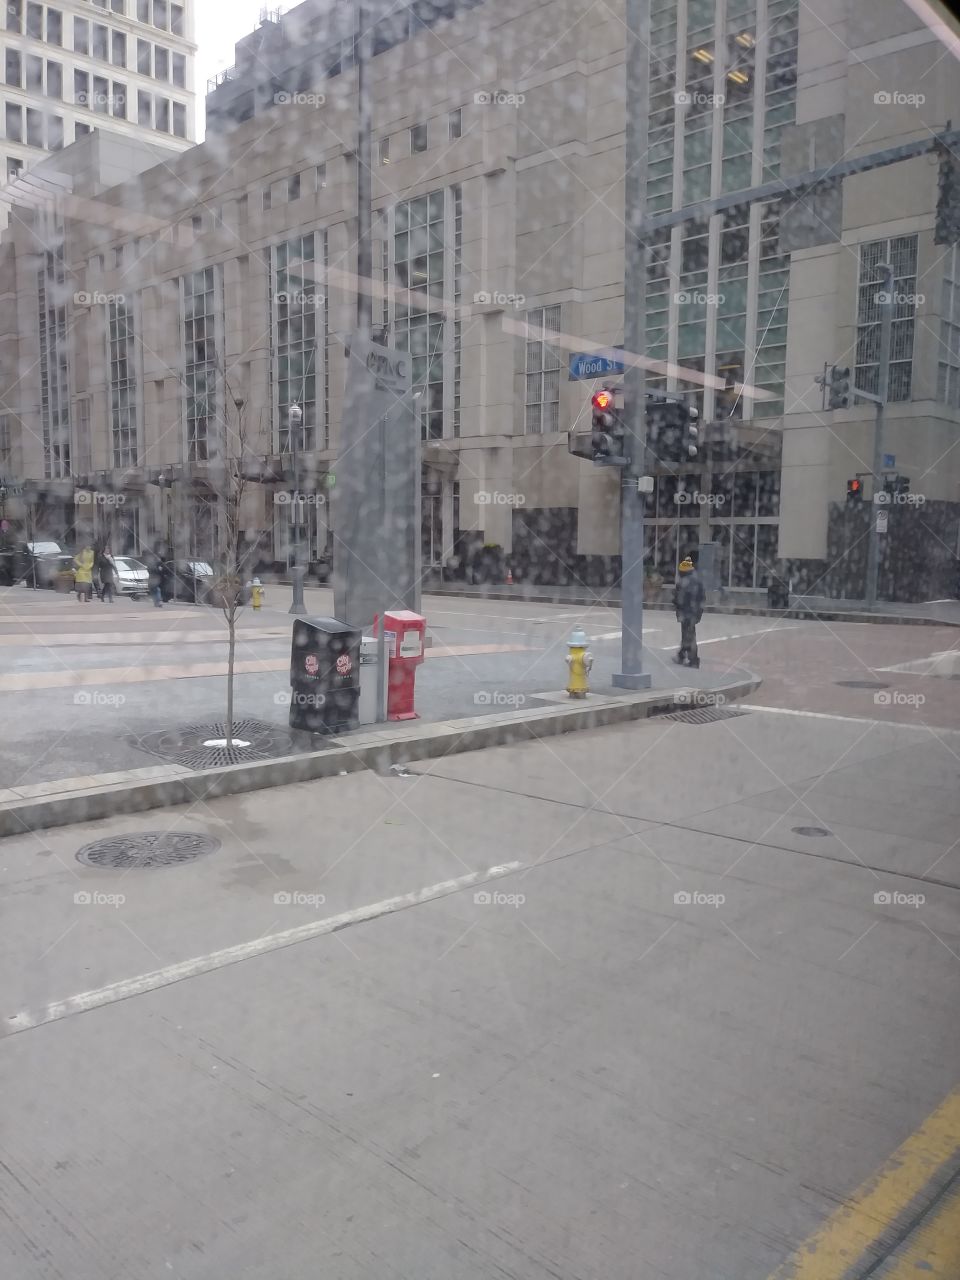 "Downtown Pittsburgh a view from the bus window."